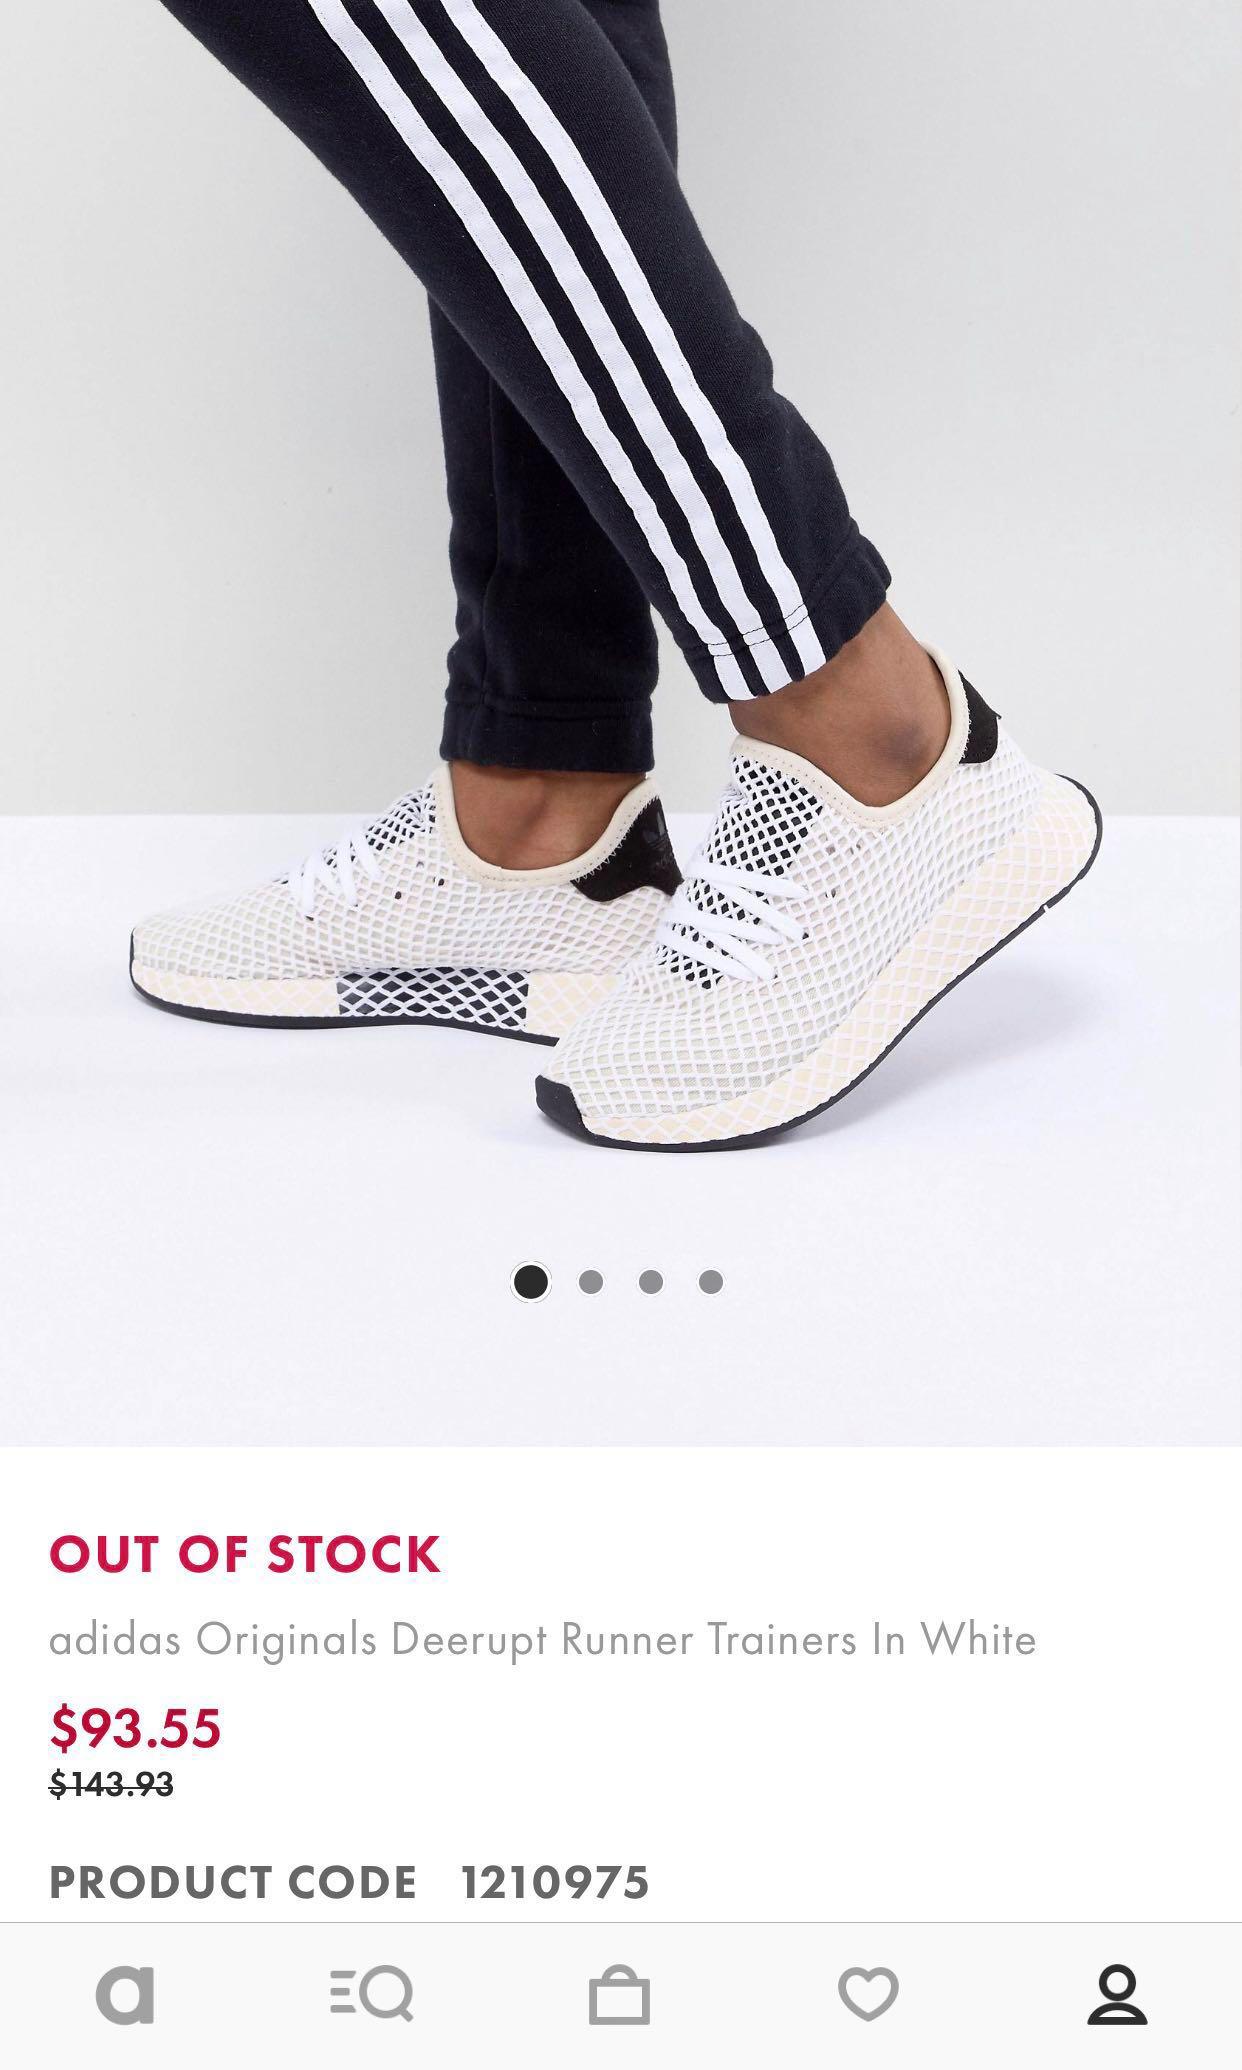 adidas original deerupt runner trainers in white, Women's Fashion, Shoes,  Sneakers on Carousell